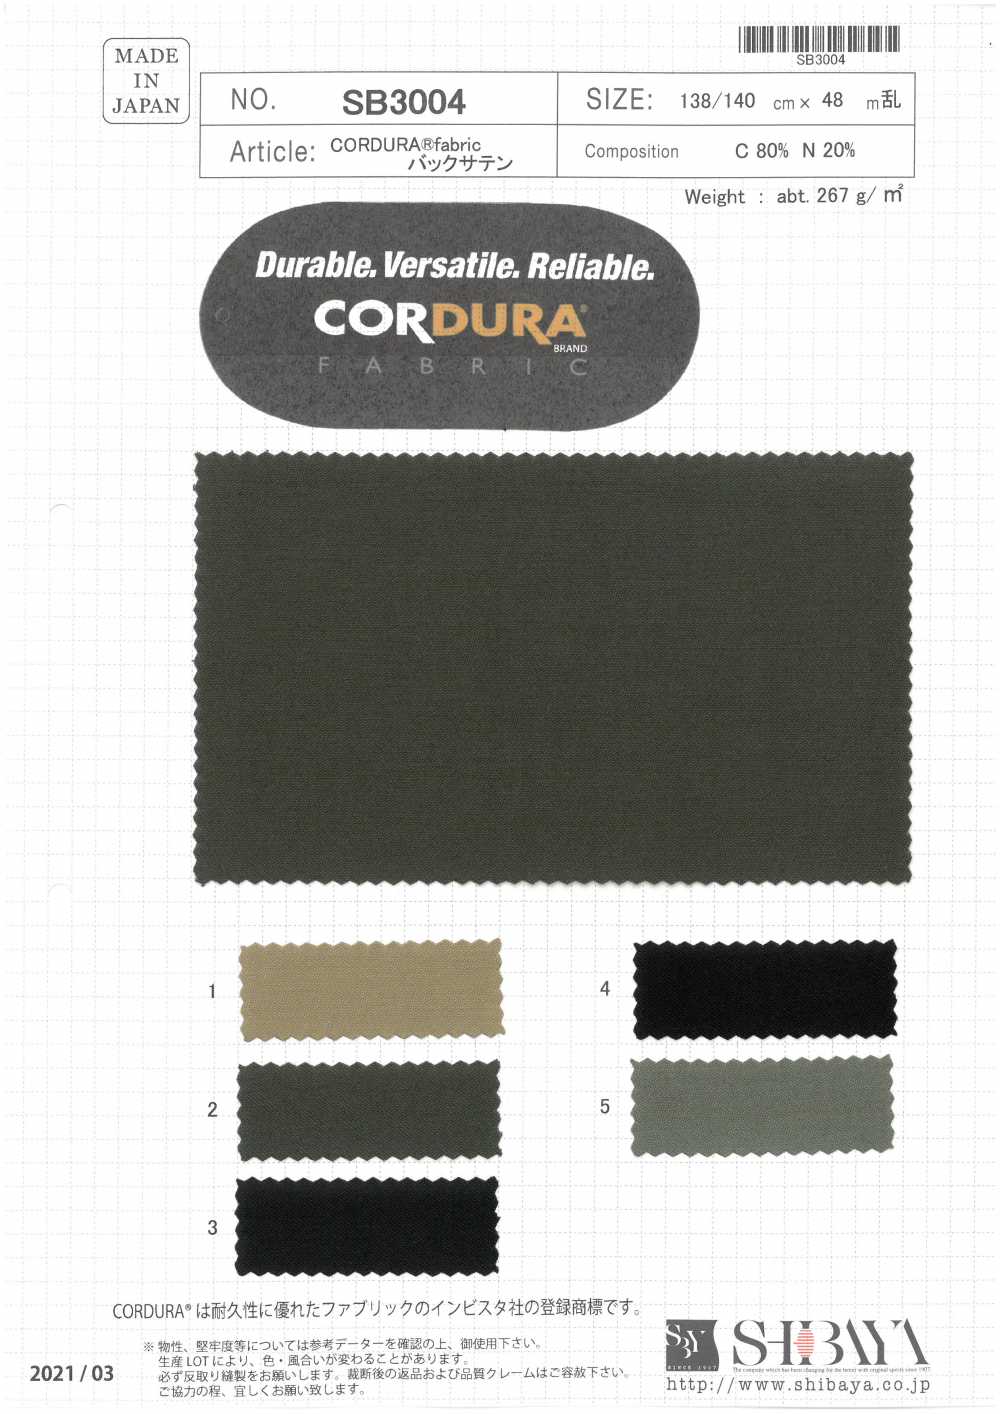 Multifunctional Flame Retardant Fabric With Comfort At Its Core By